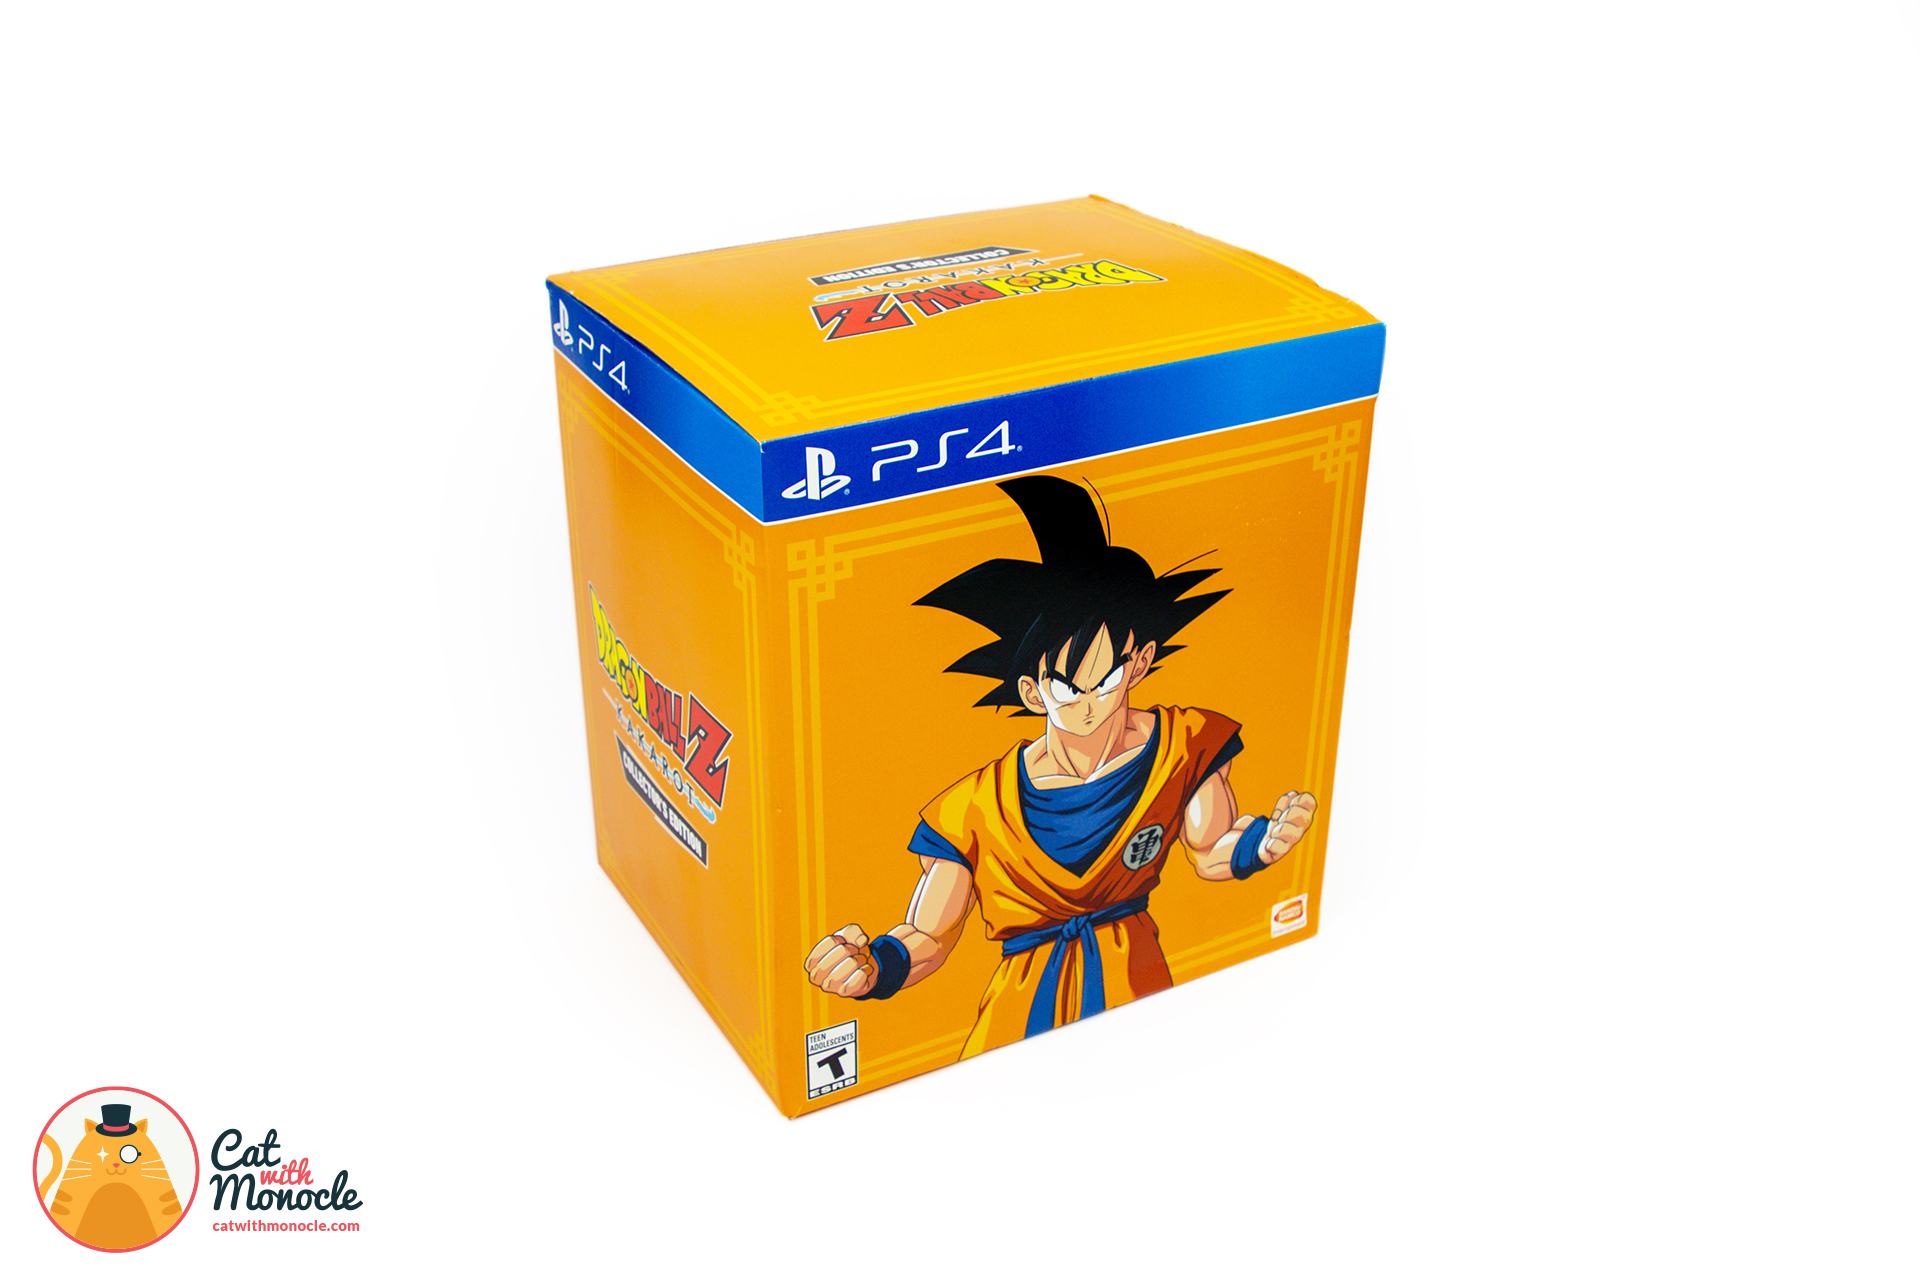 Dragonball Xenoverse 2 Xbox One Steelbook Special Edition w/OST